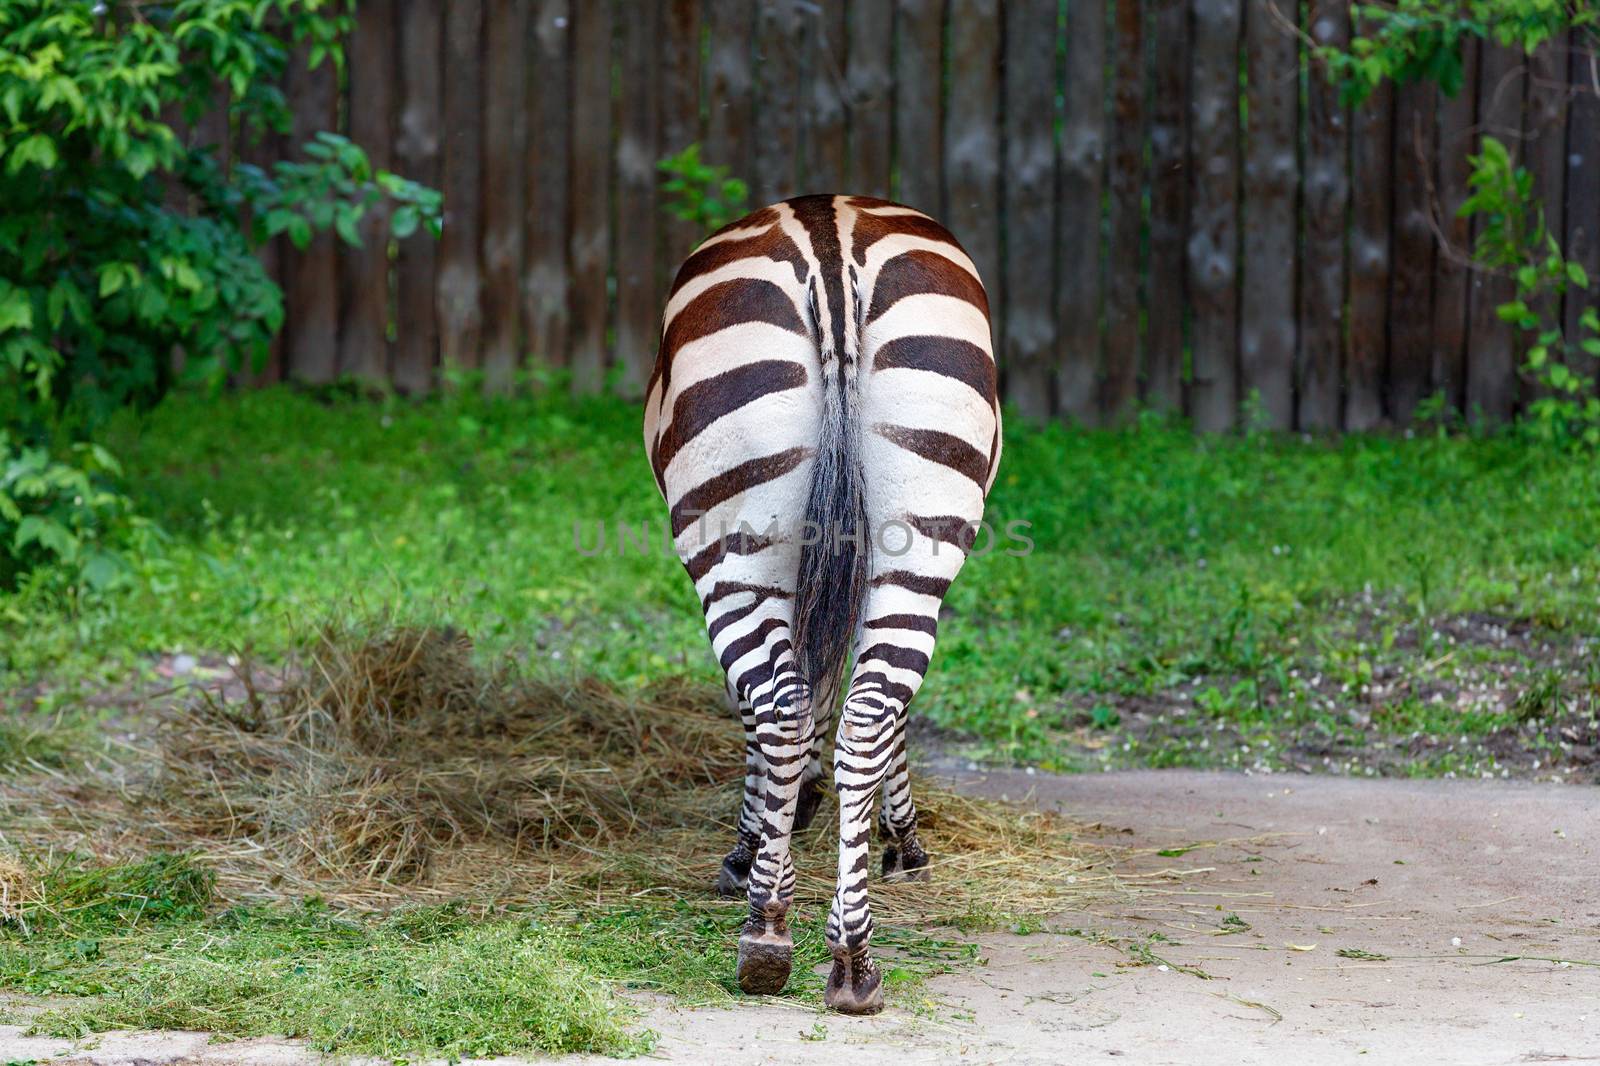 The striped zebra is turned backwards and eats hay against a background of green grass and a wooden fence in blur.